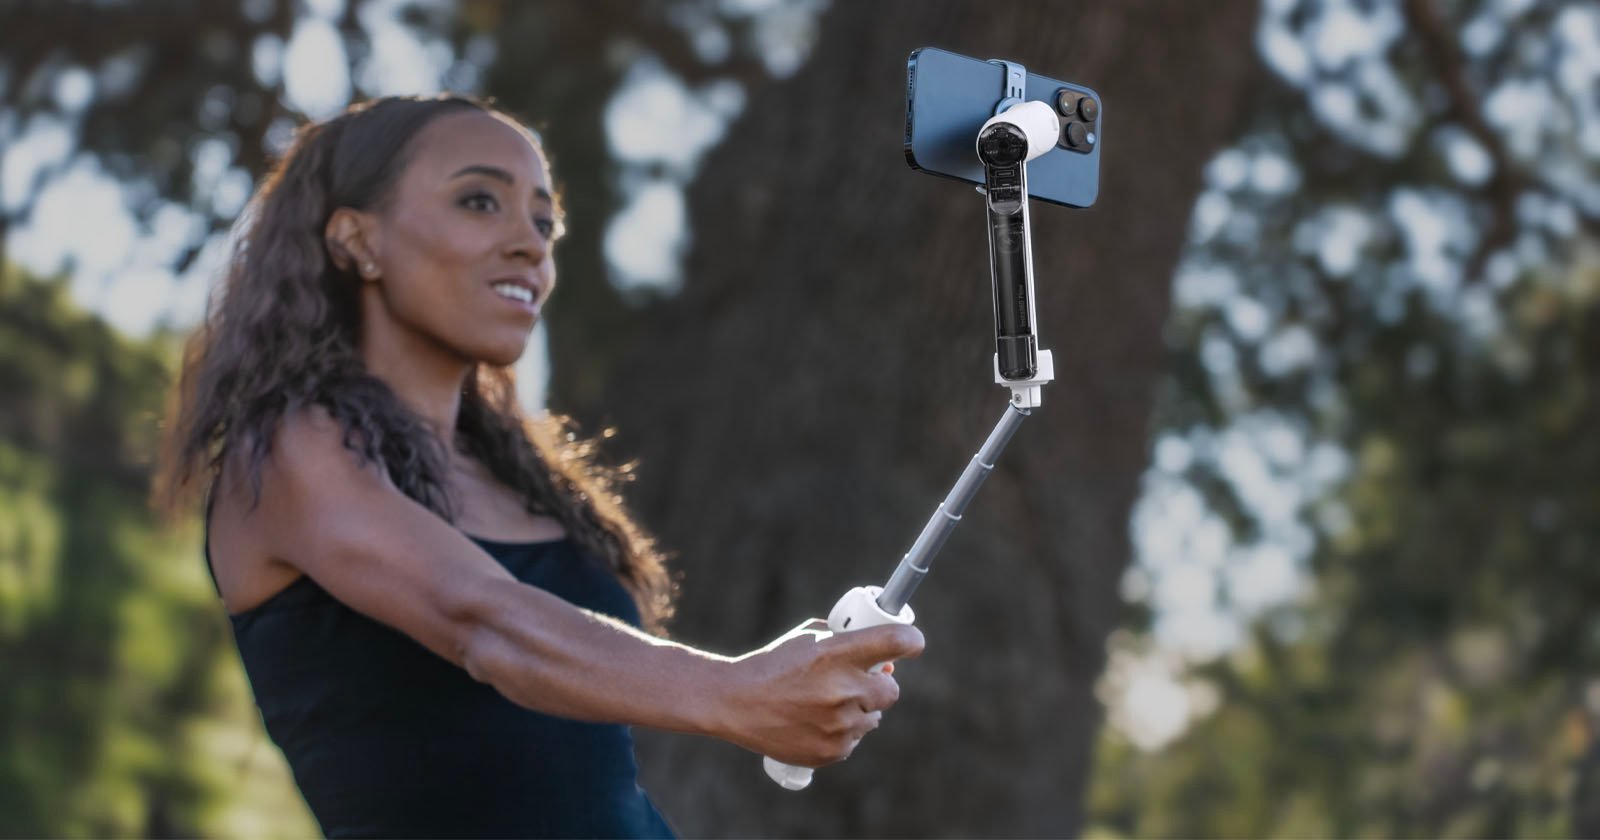 Insta360 Flow announced: an AI tracking smartphone stabilizer with built-in  selfie stick and tripod -  news